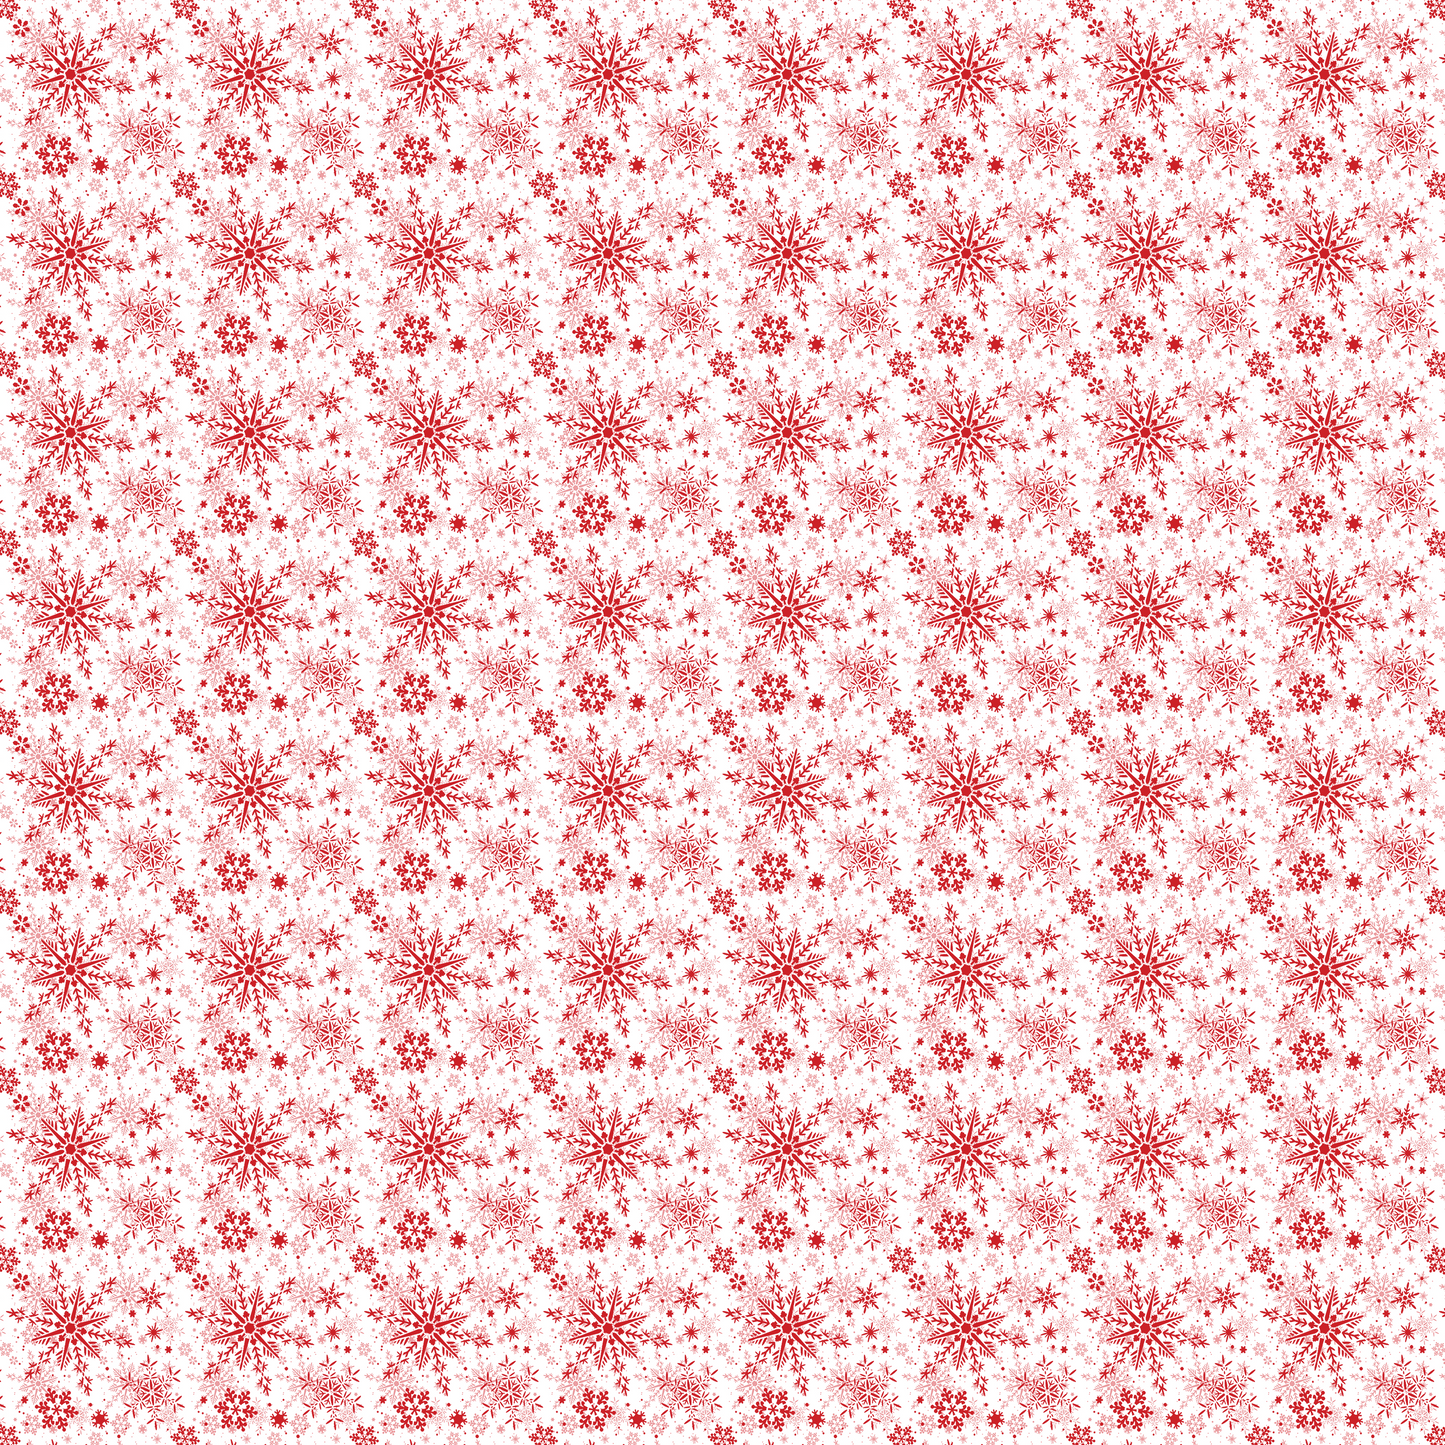 Red Snowflakes on a White Background 003